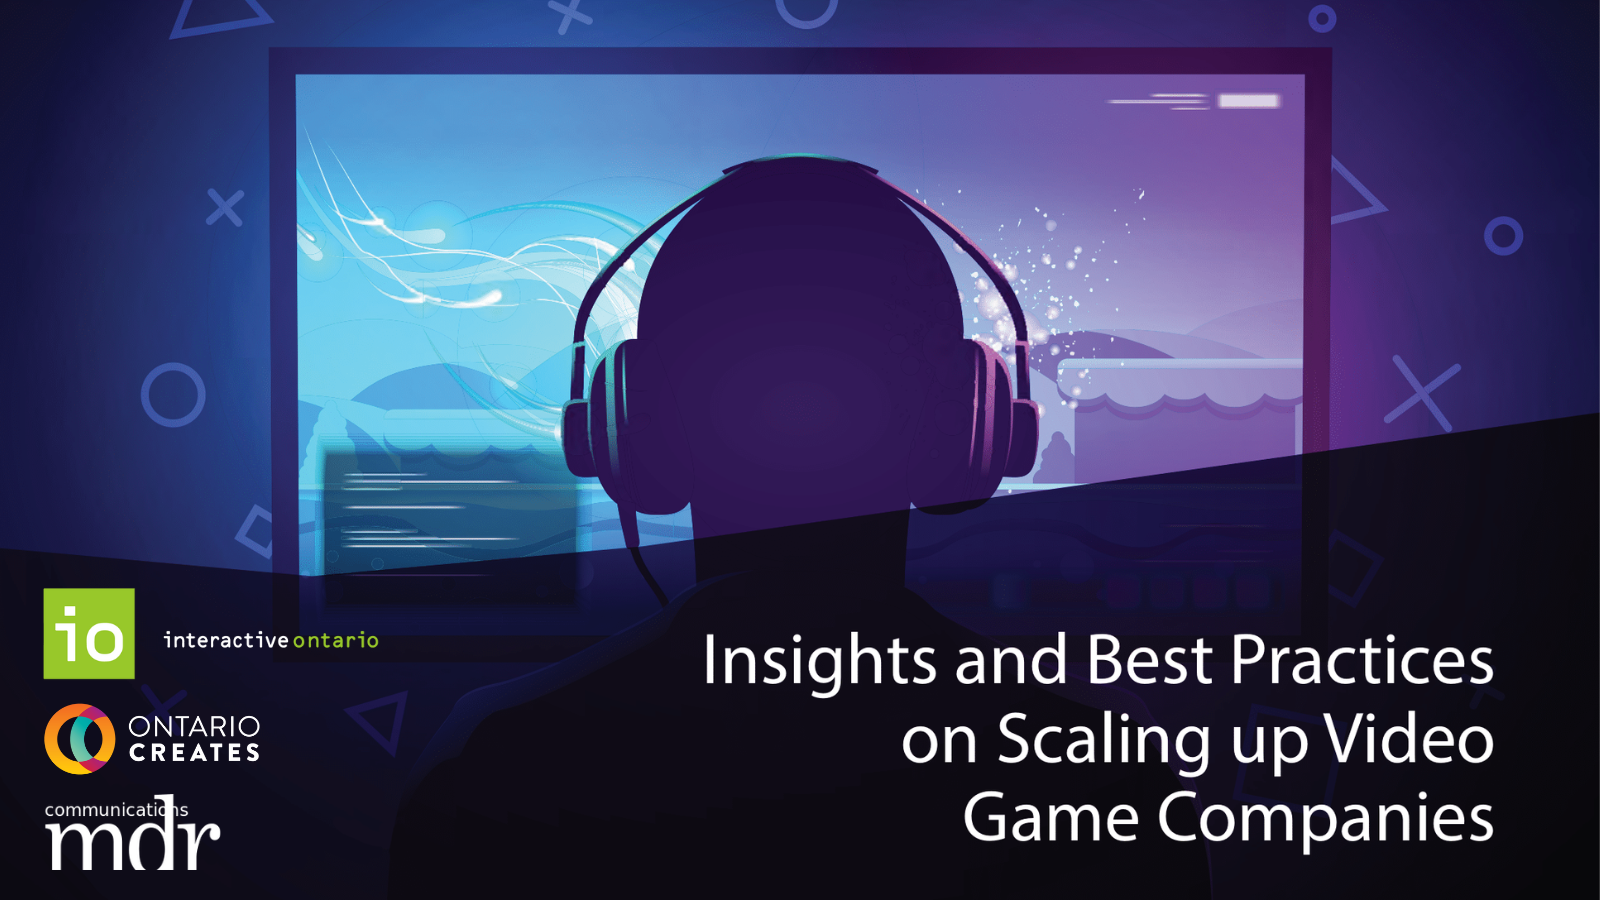 Insights and Best Practices on Scaling Up Video Game Companies